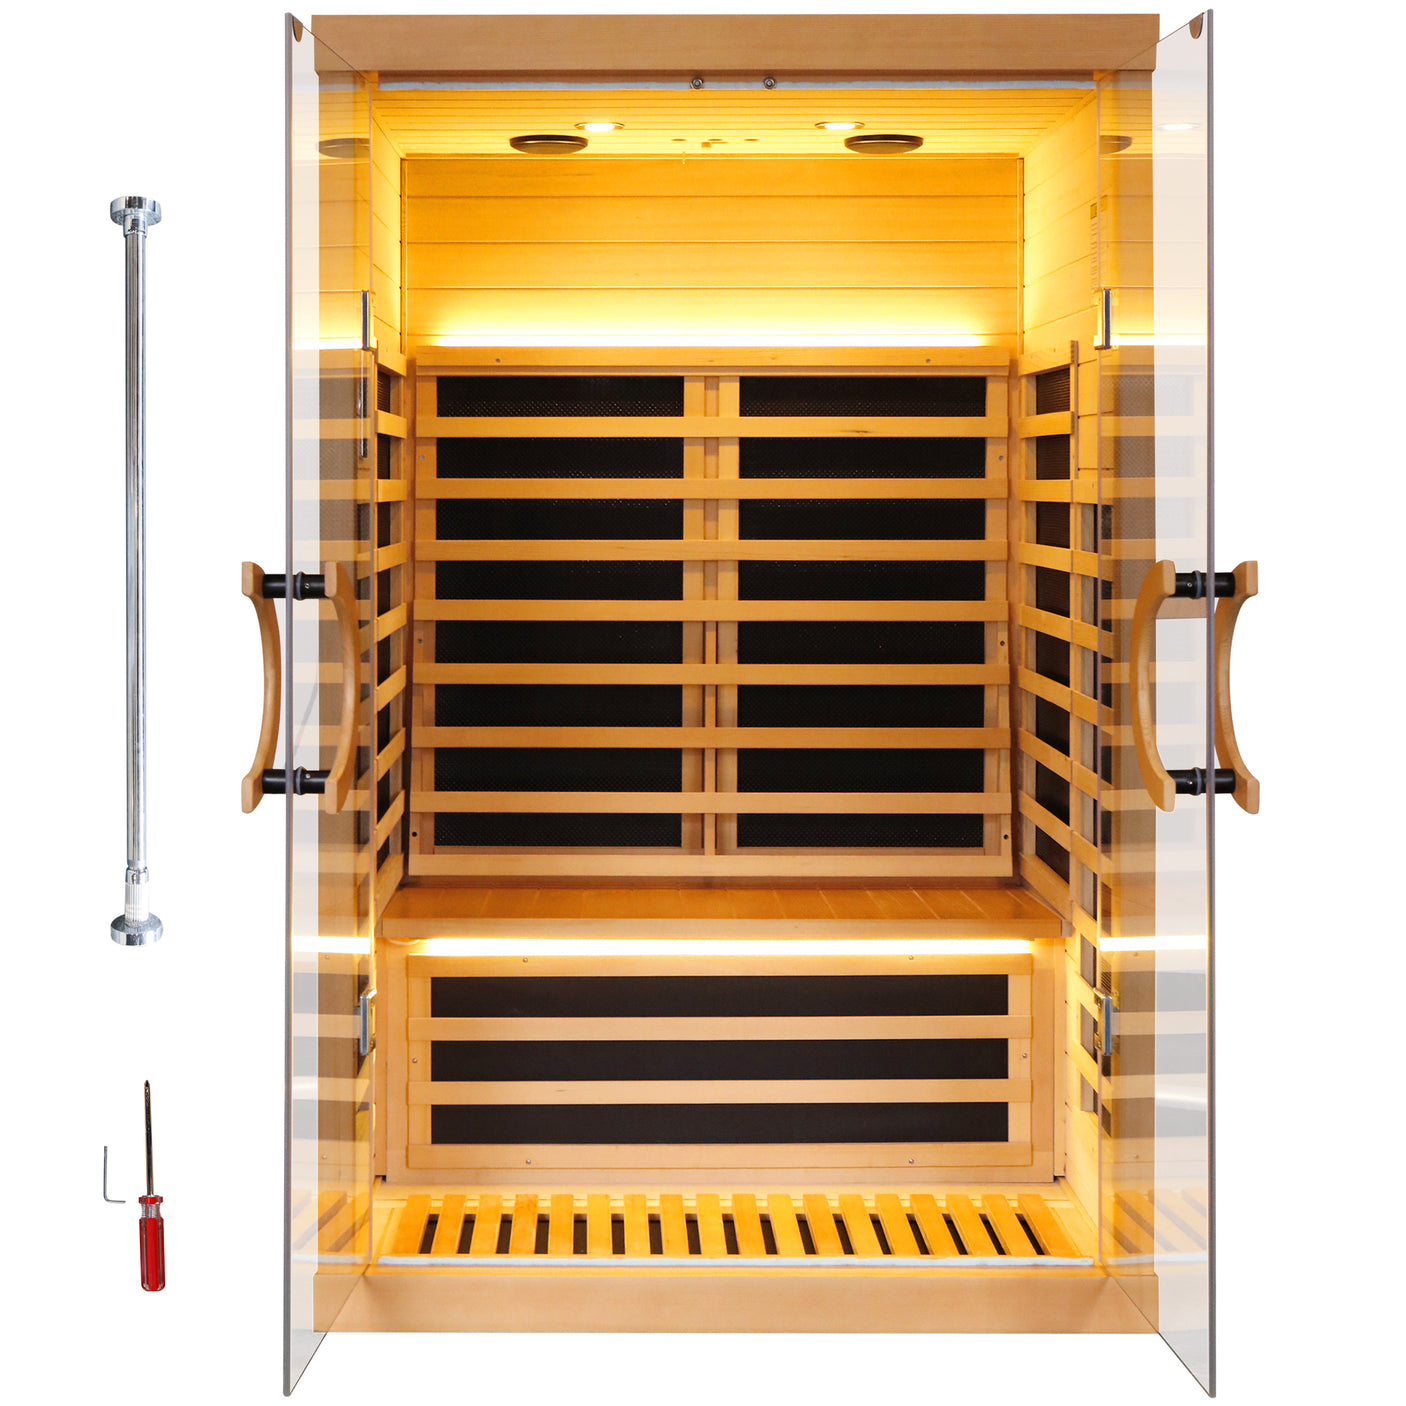 Far-infrared sauna room double glass family model with bluetooth audio app control